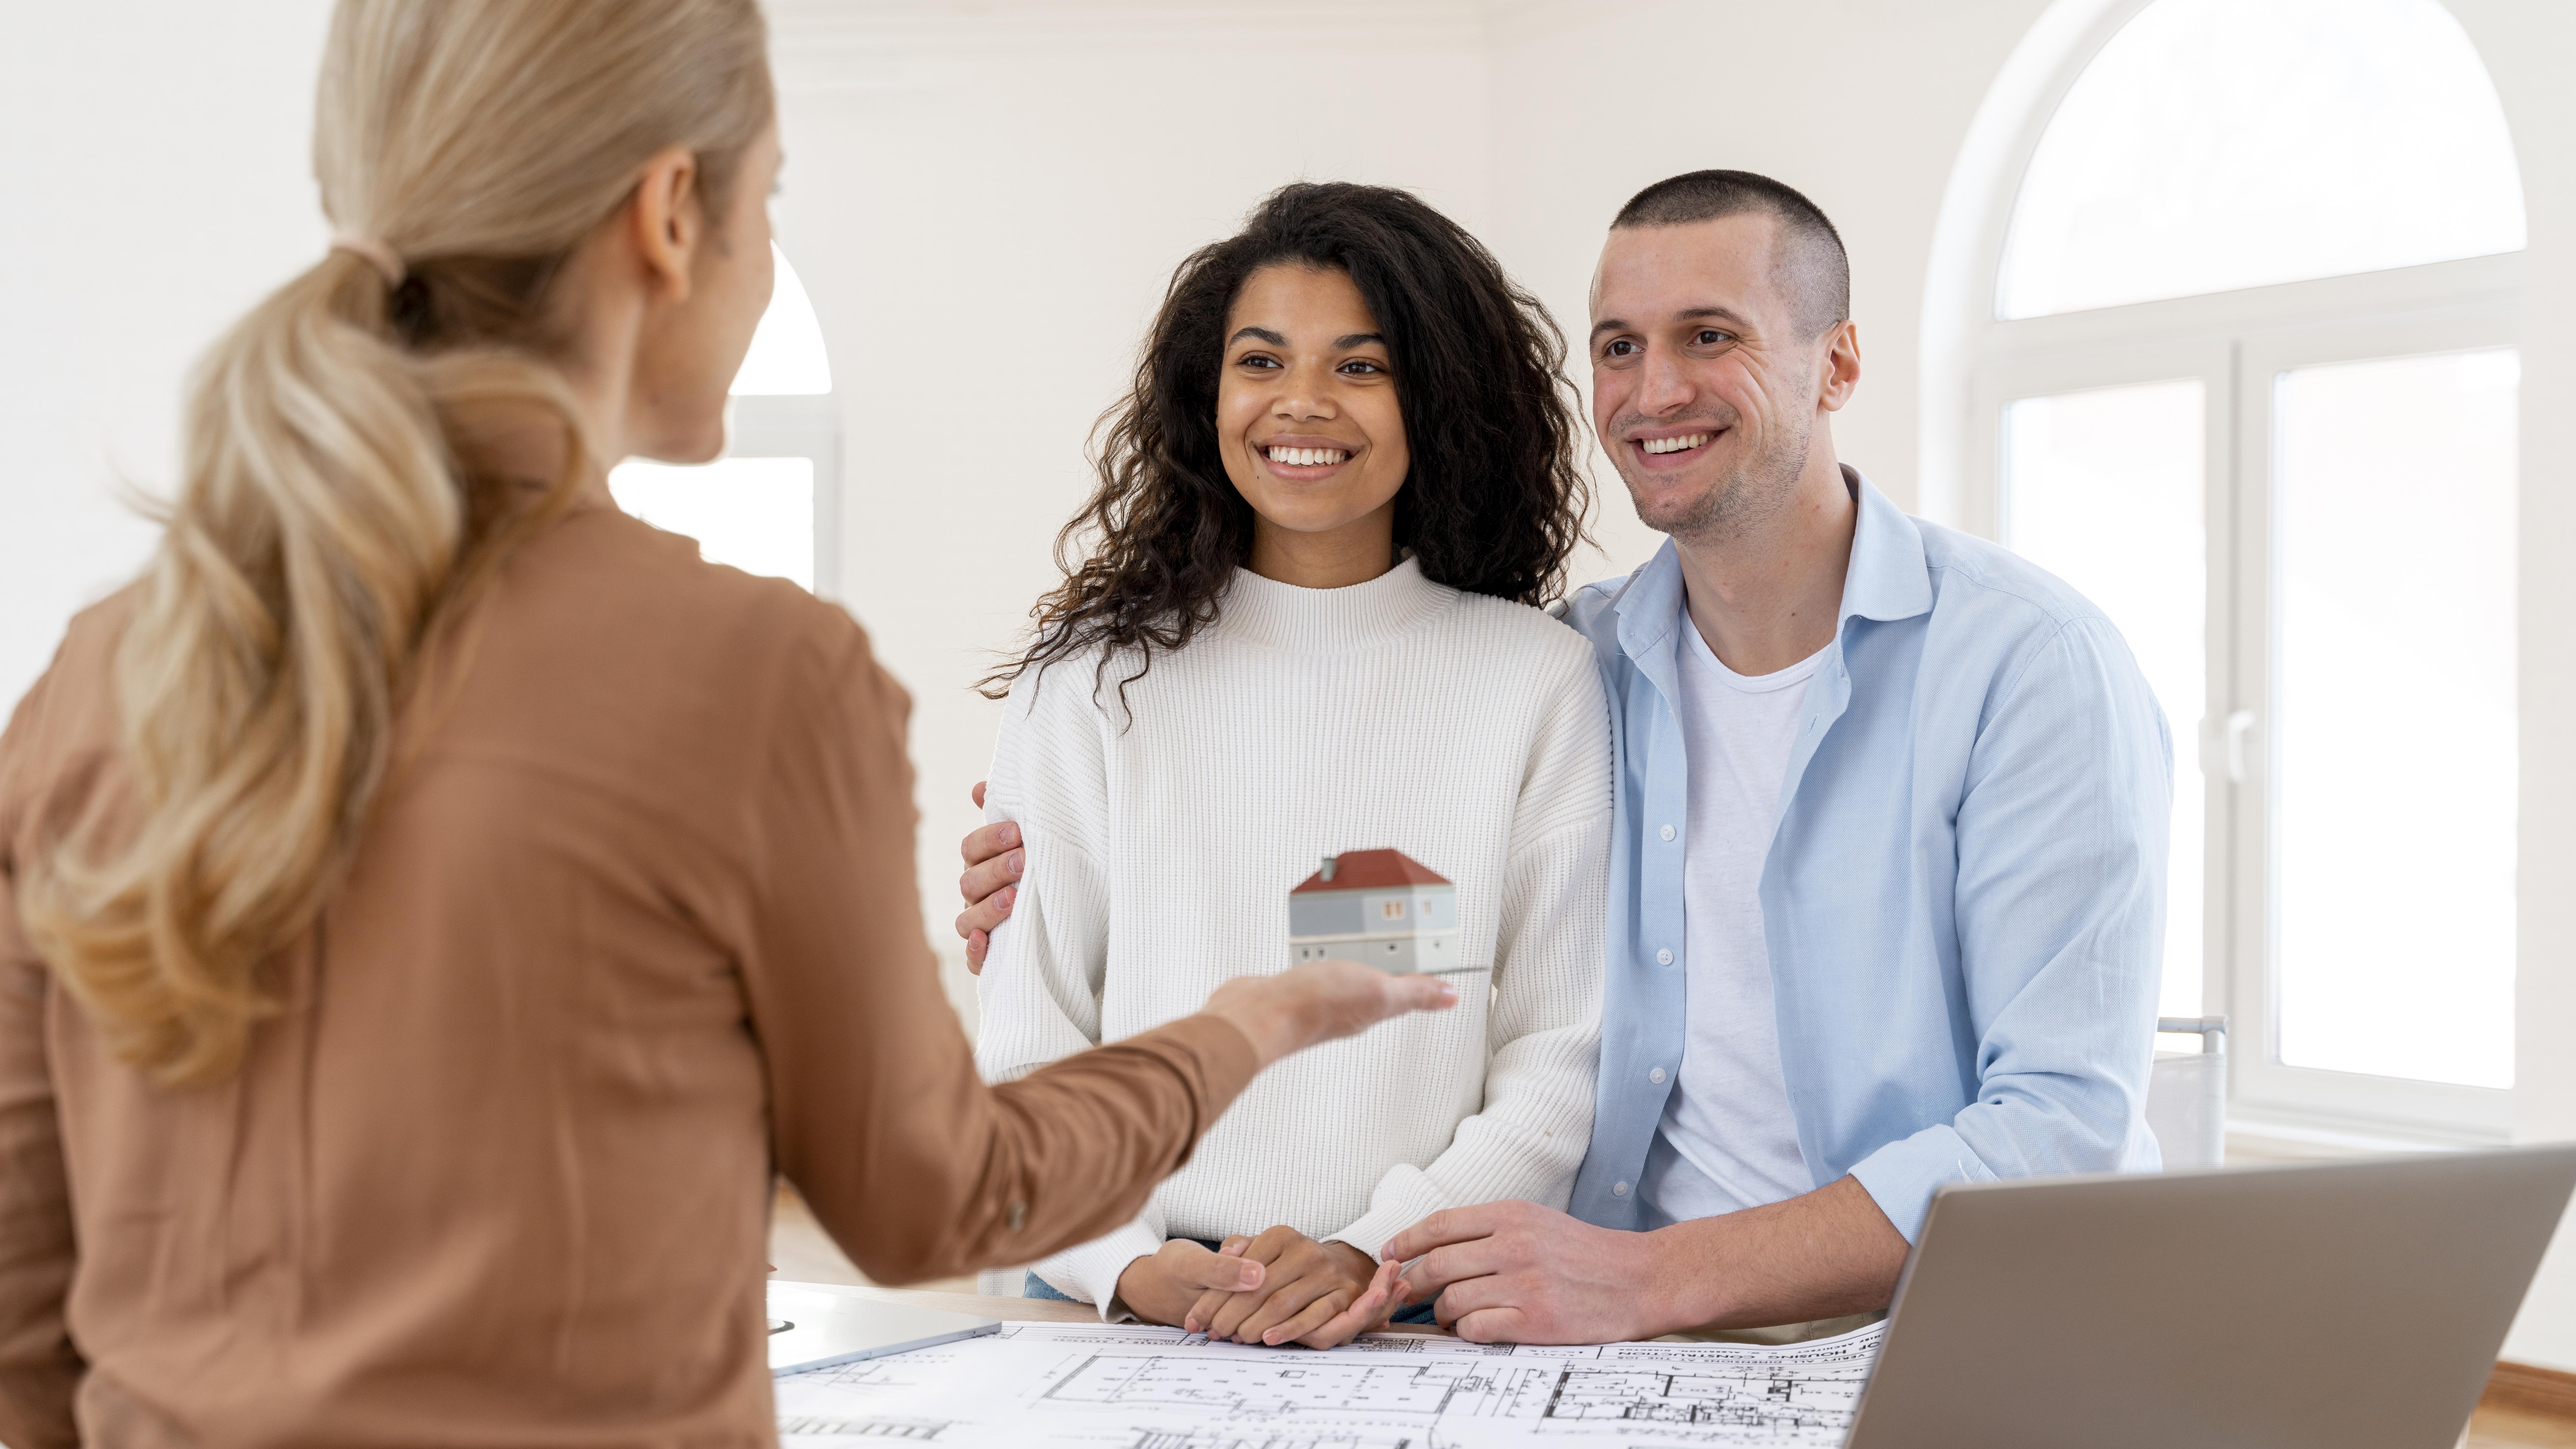 Questions to Ask Before Commissioning a Real Estate Appraisal